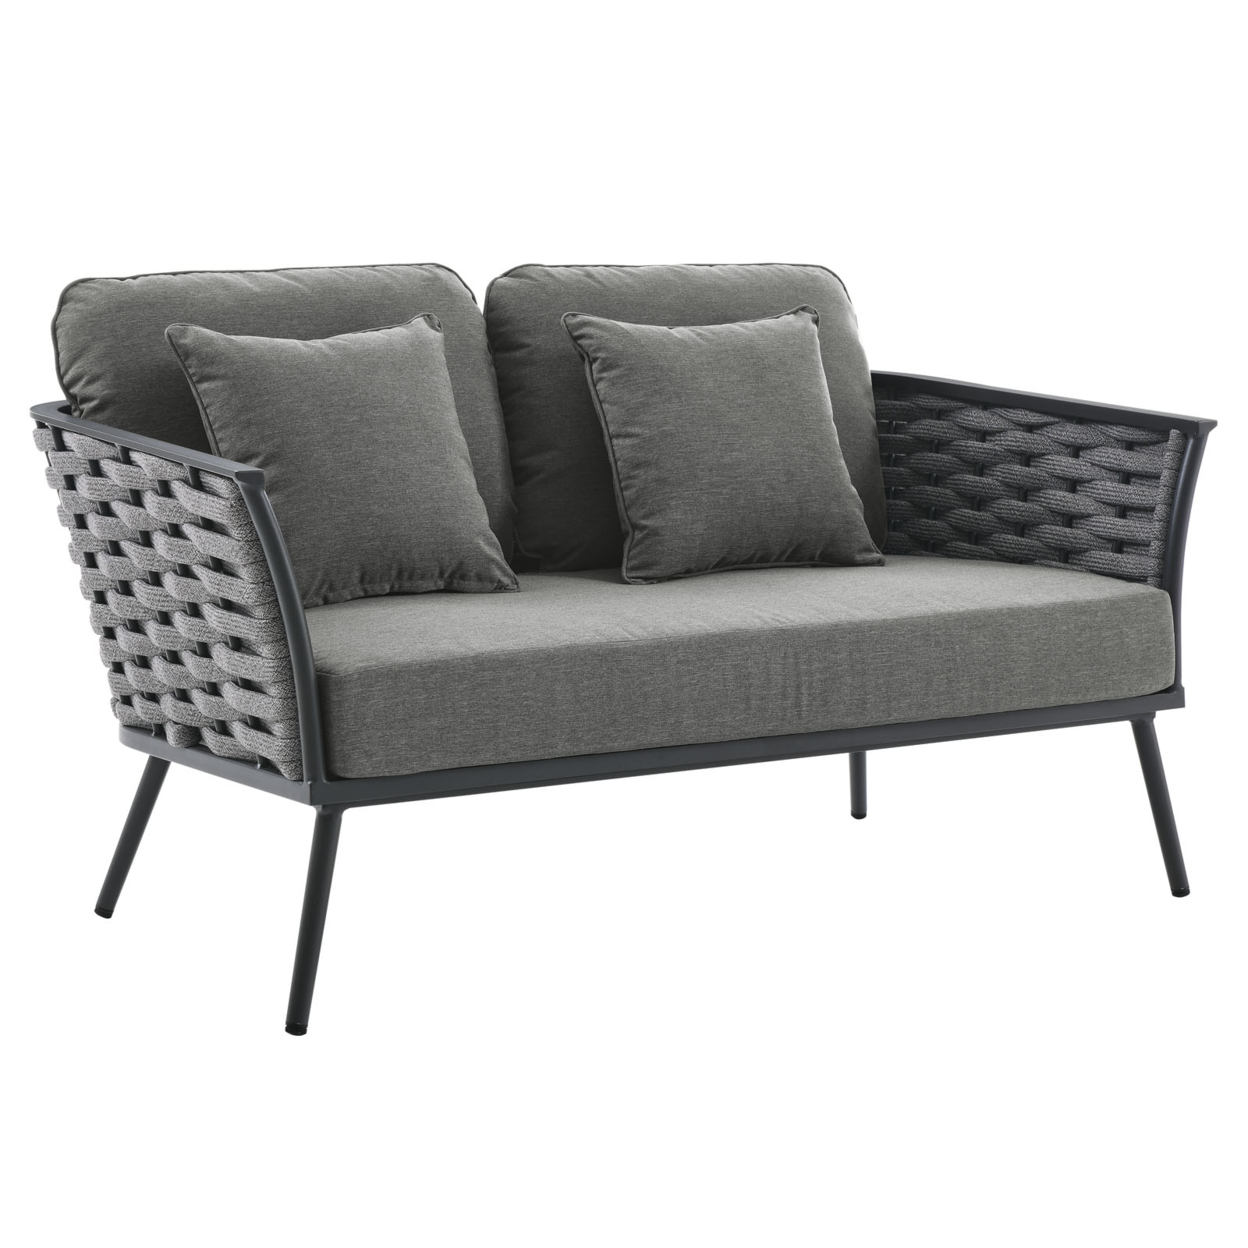 Stance Outdoor Patio Aluminum Loveseat, Gray Charcol